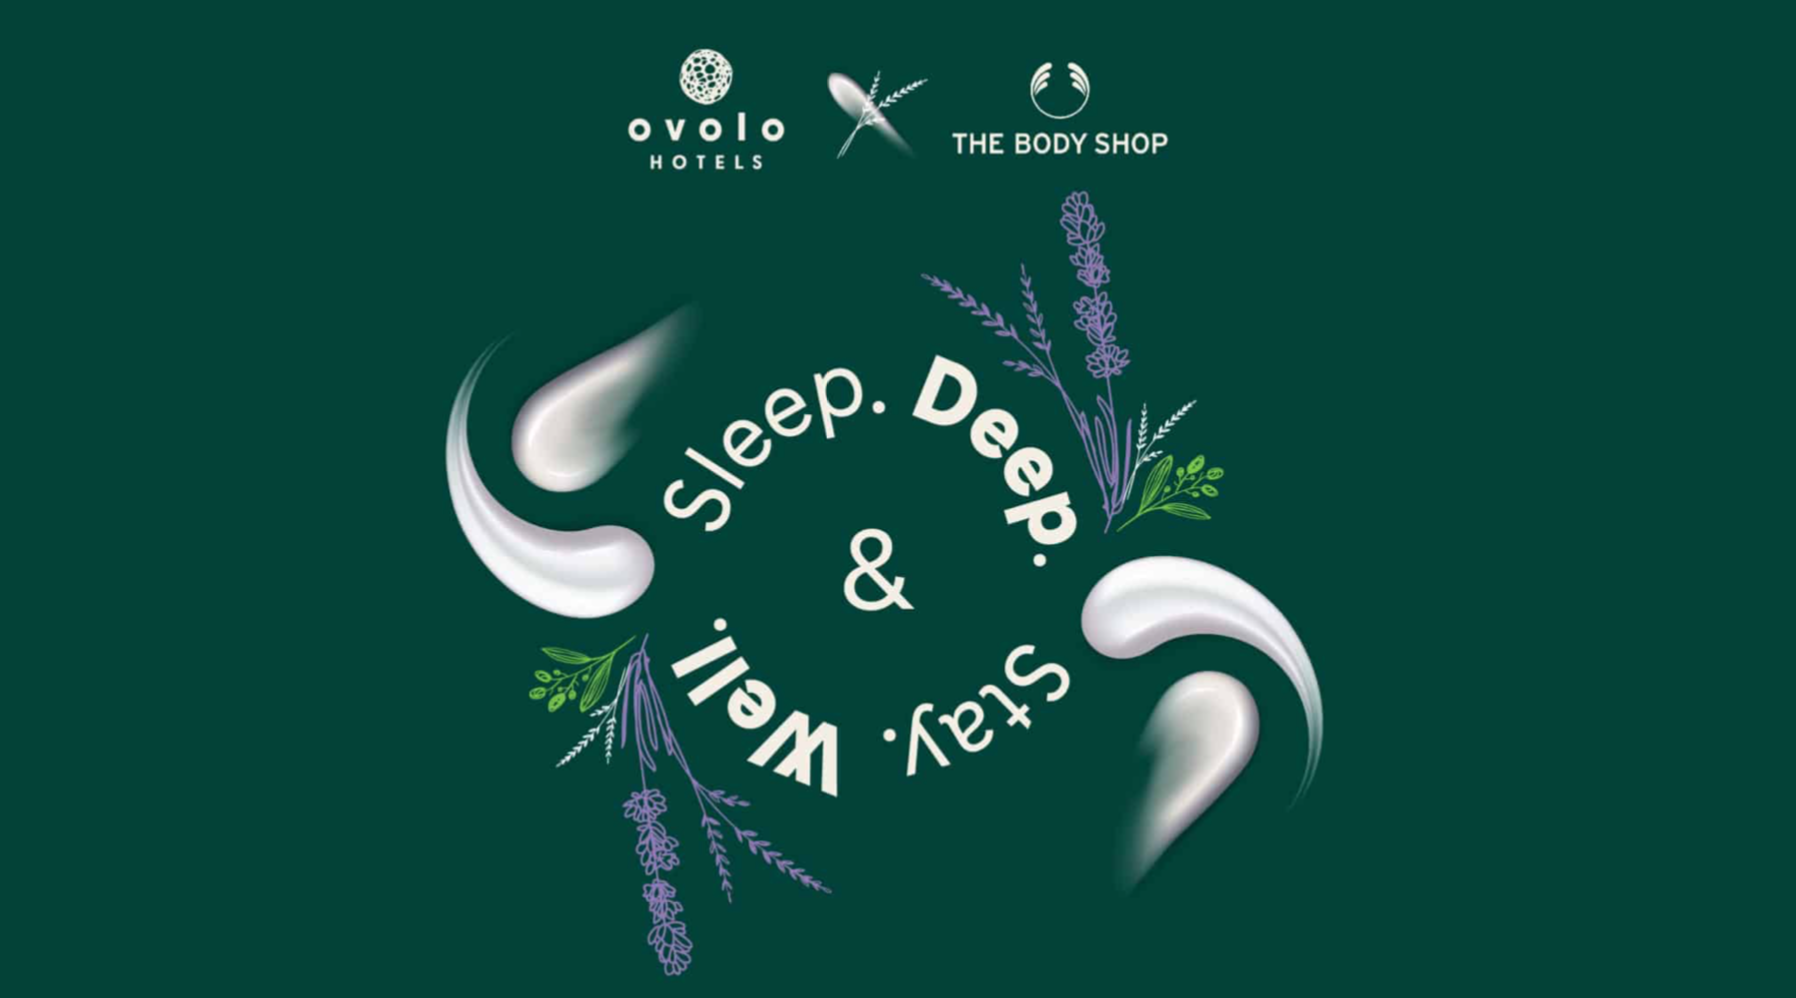 Experience sweet dreams with Ovolo’s new Wellness Package